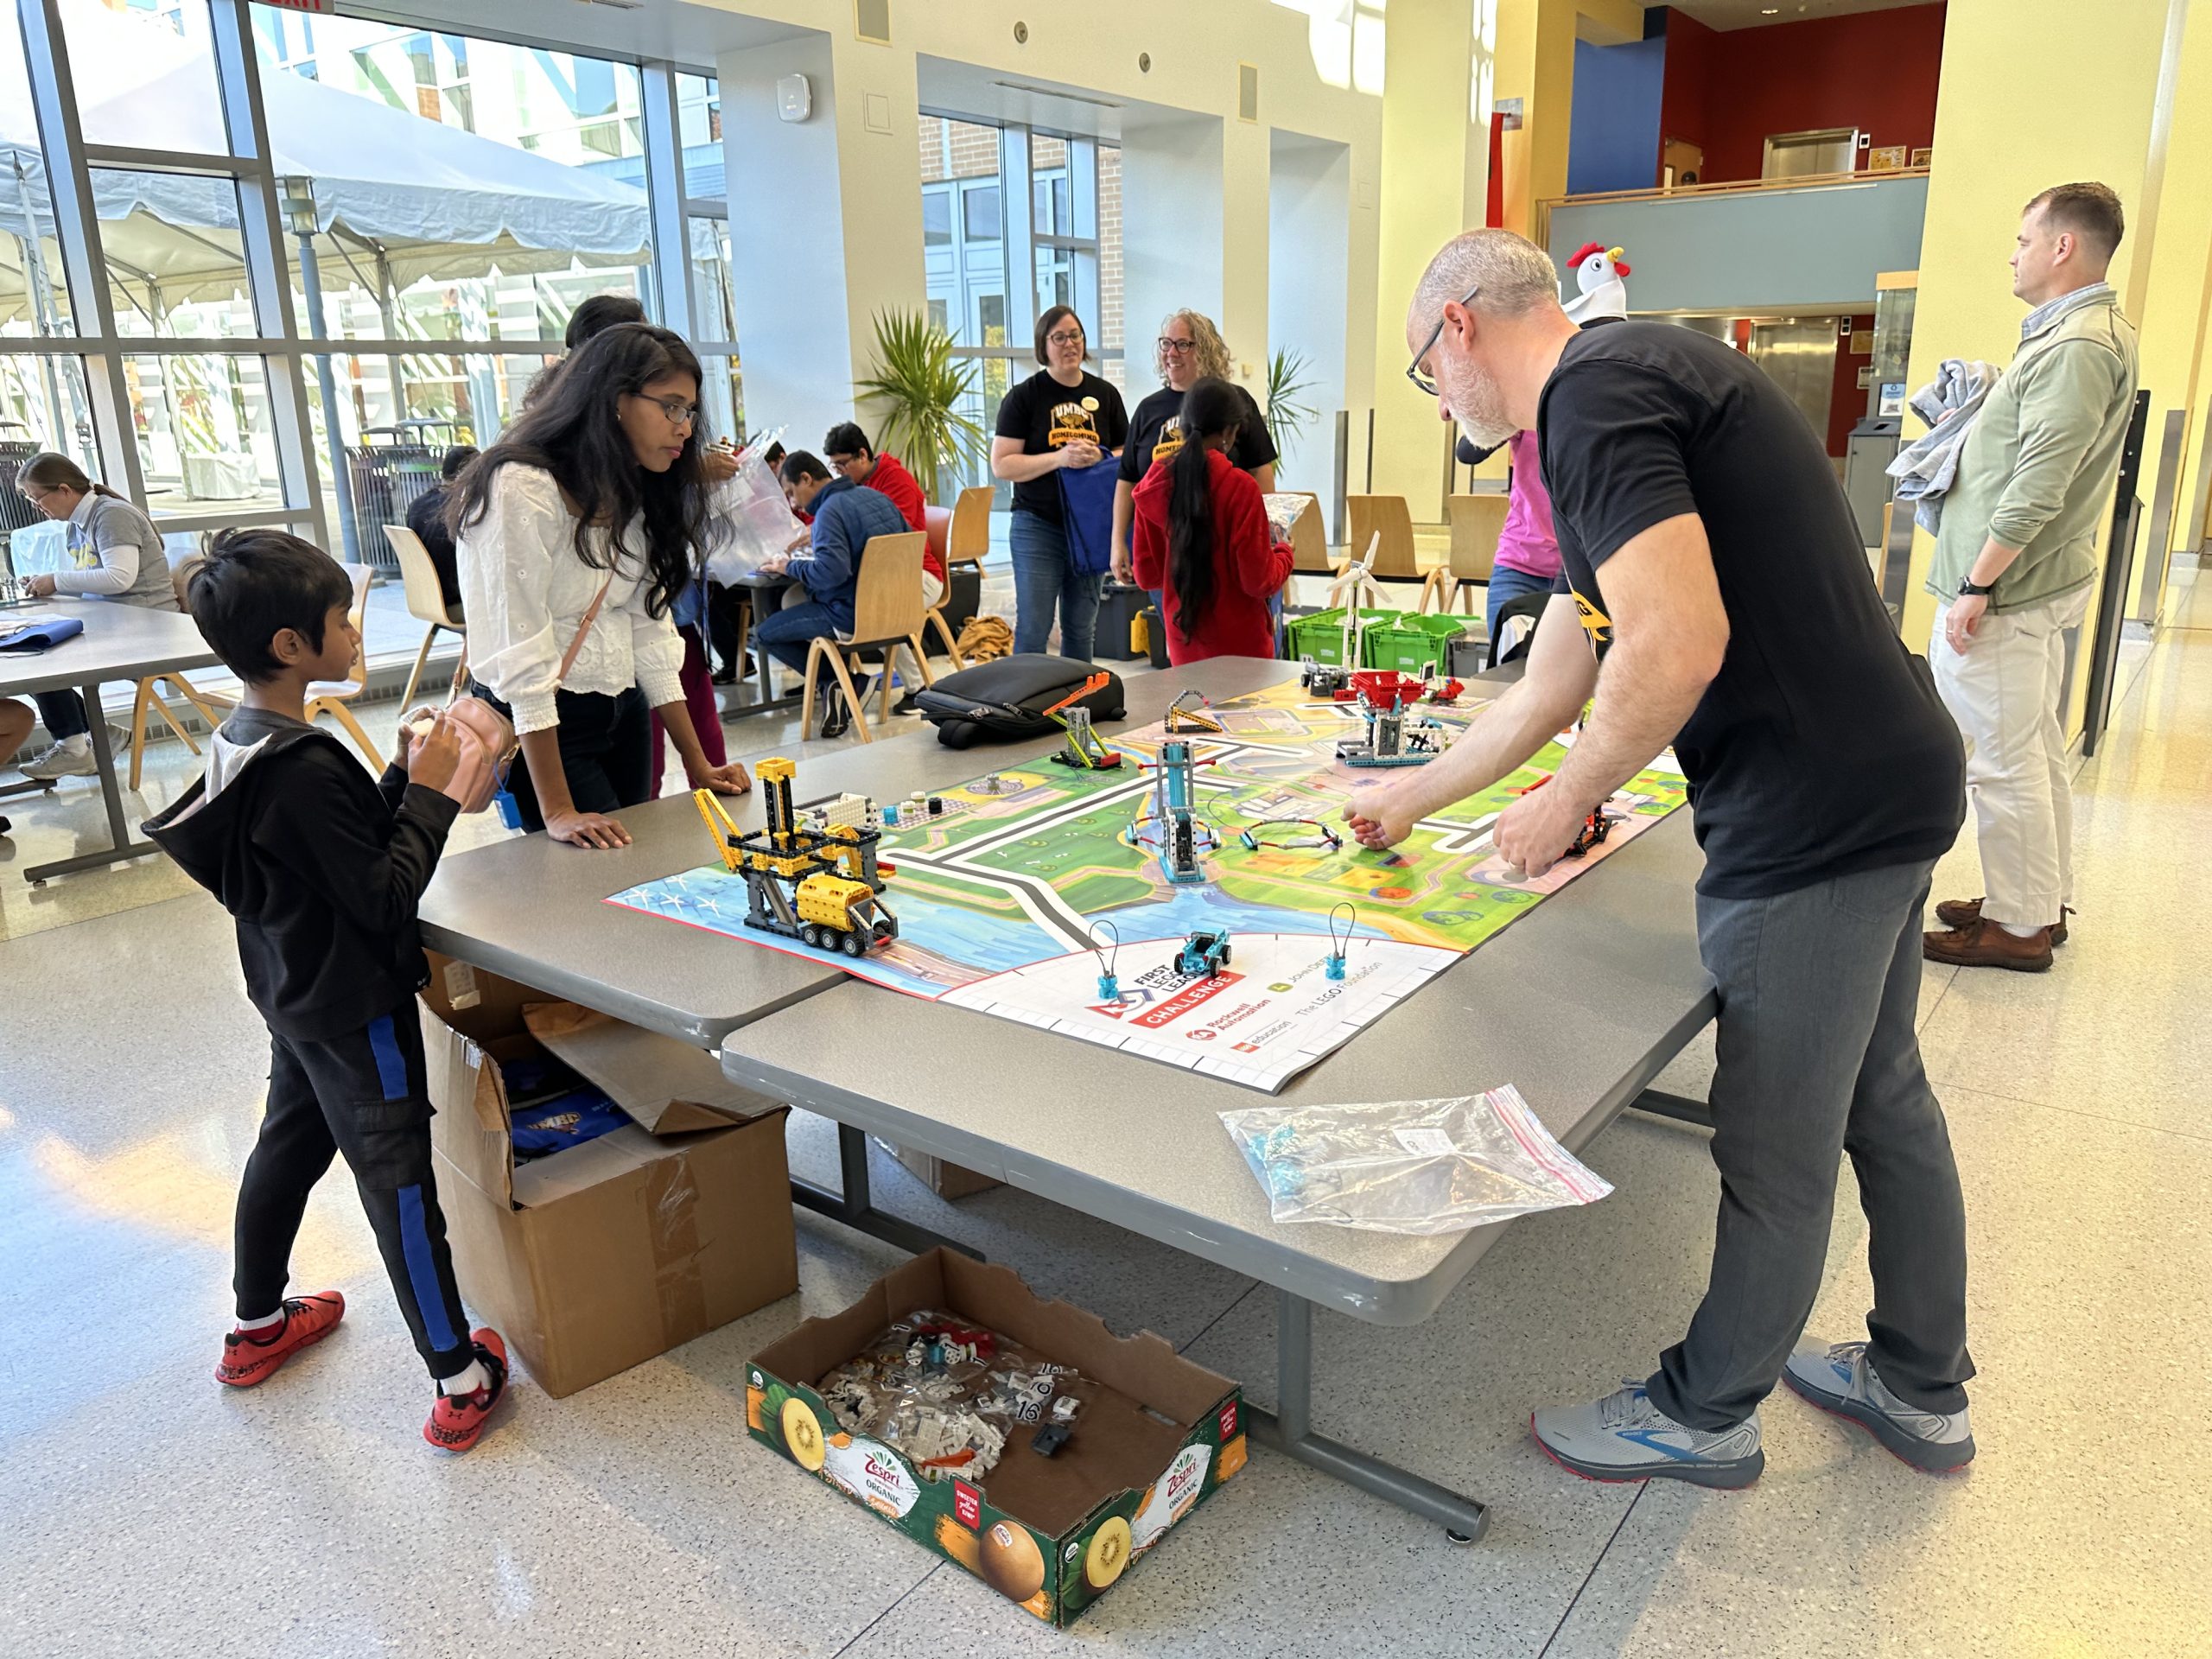 People gathered around a FIRST Lego League Challenge mat building models for competitions,